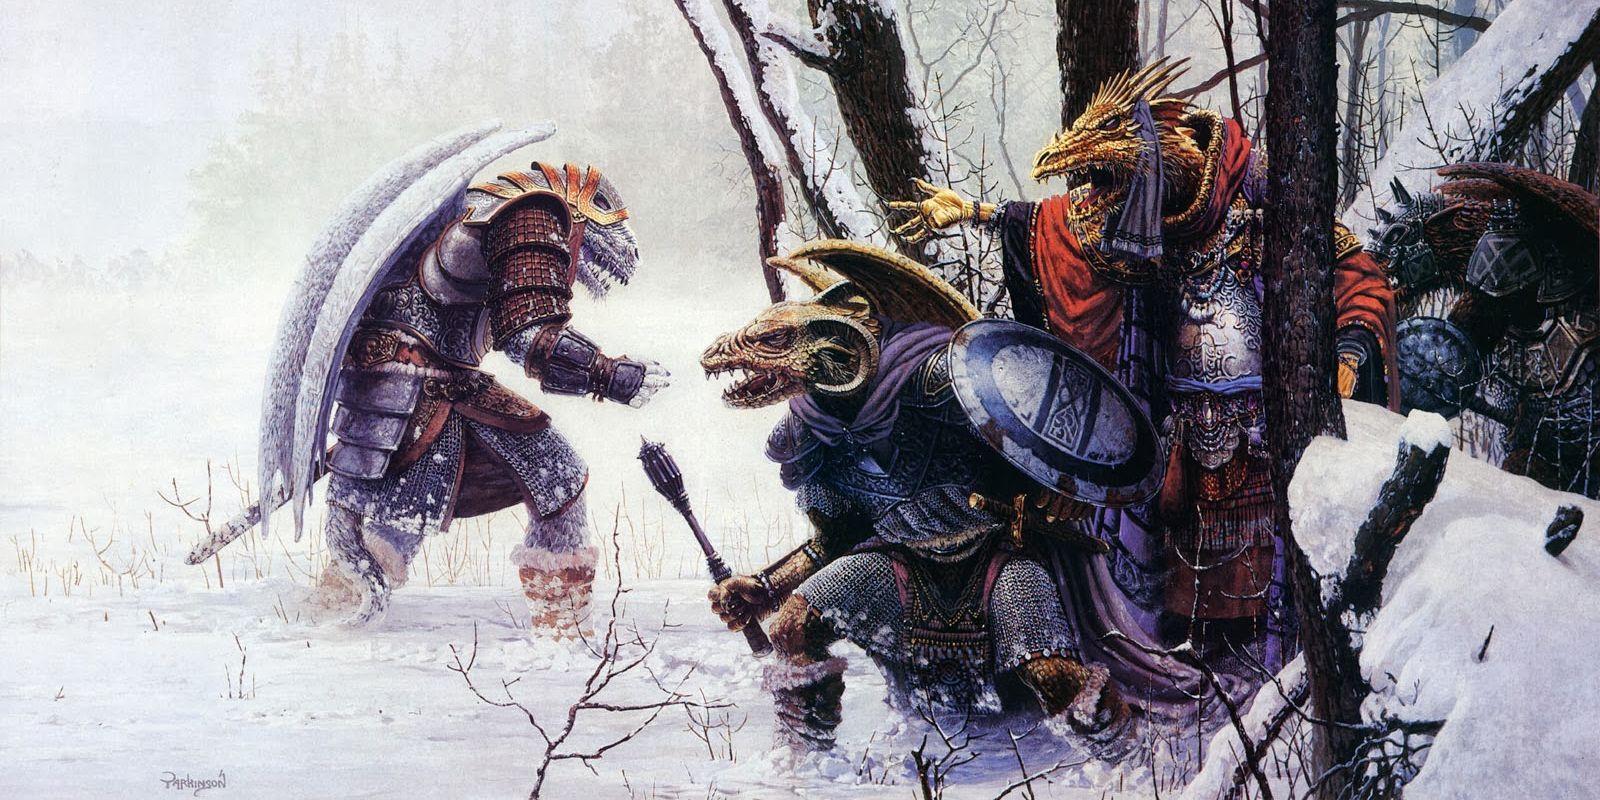 dnd draconians fighting on a snowy battlefield